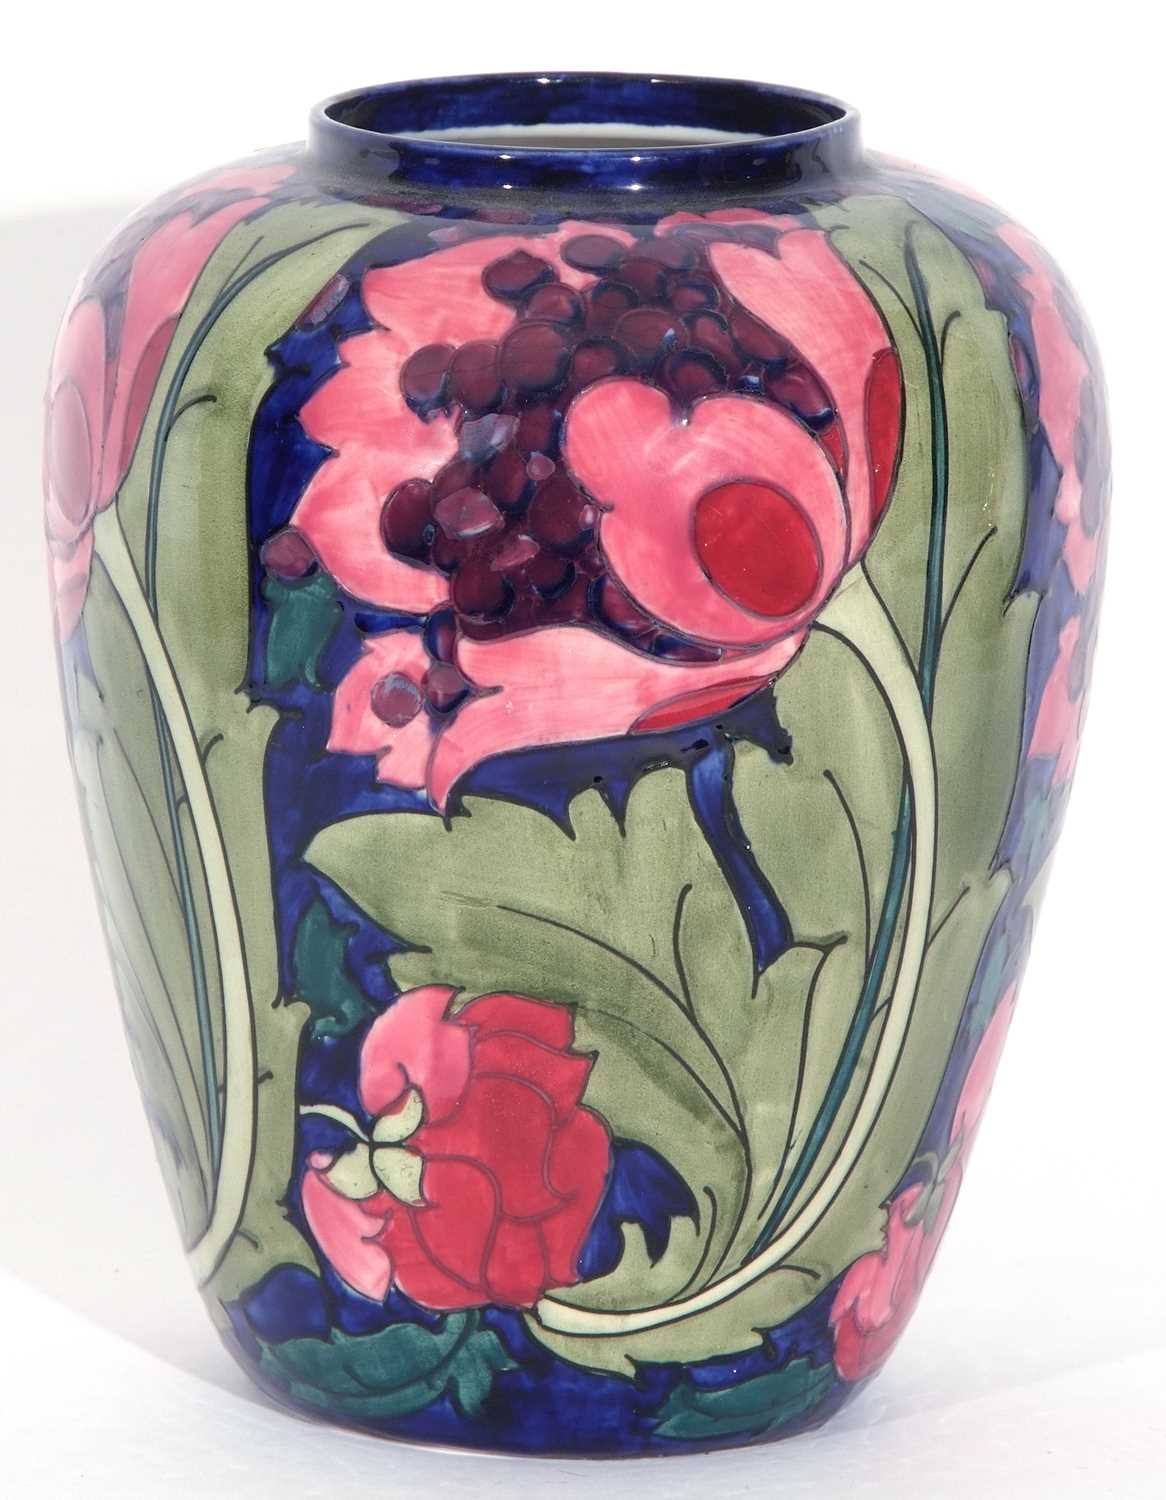 Bursley ware seed poppy style vase after a design by Charlotte Rhead, 21cm high - Image 3 of 4